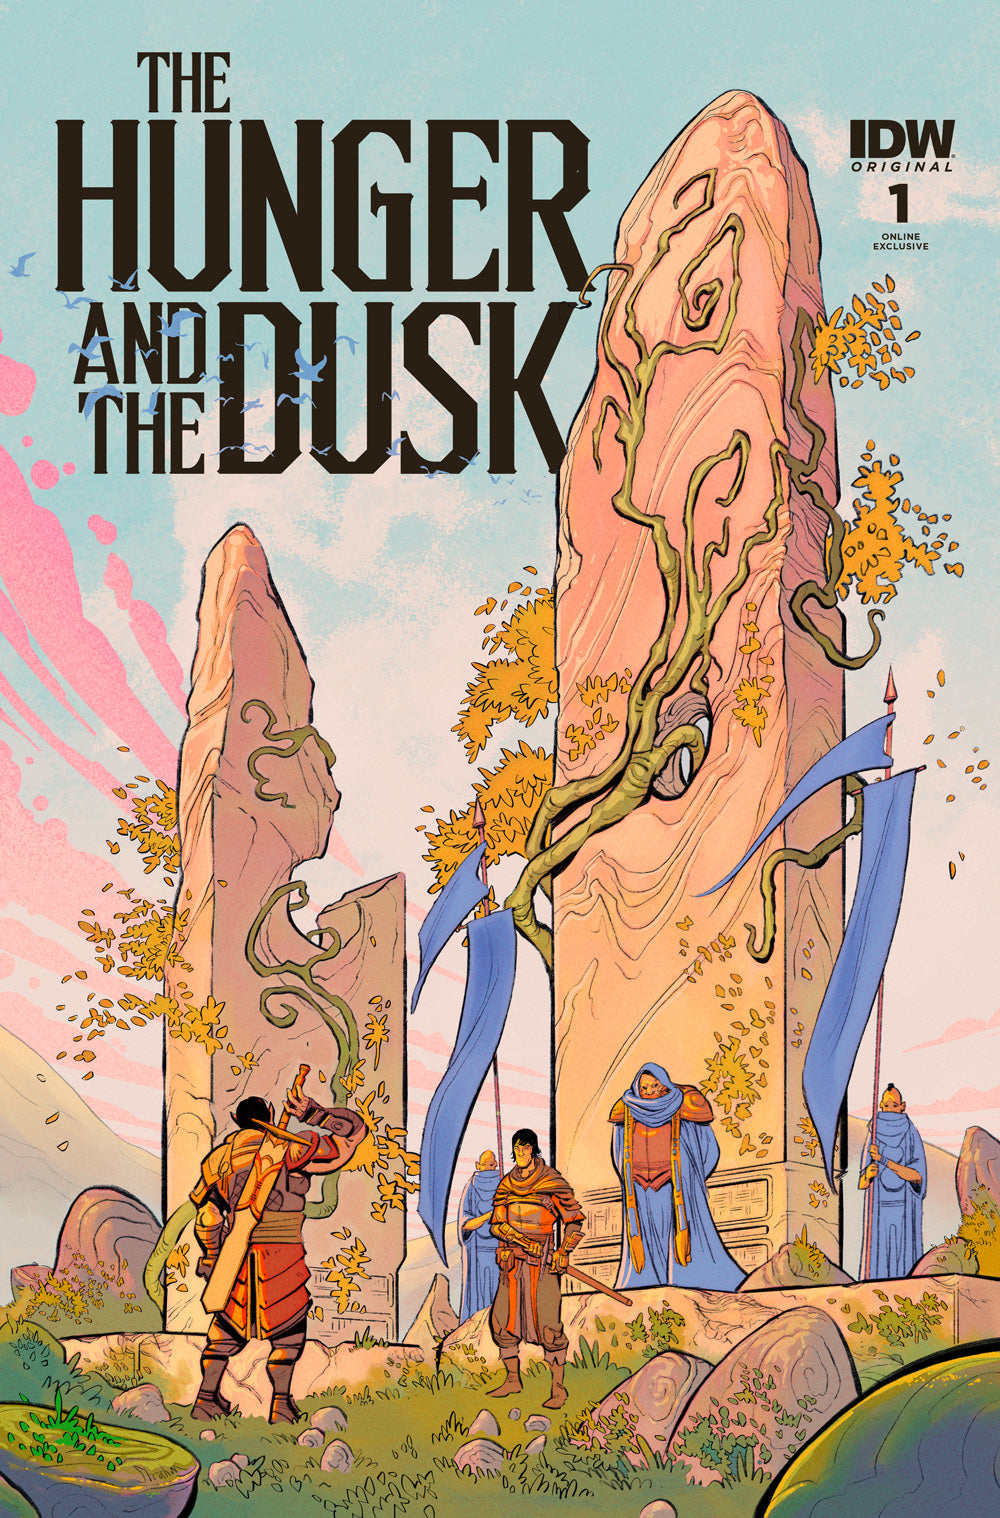 The Hunger and the Dusk #1 - 2023 Online Exclusive